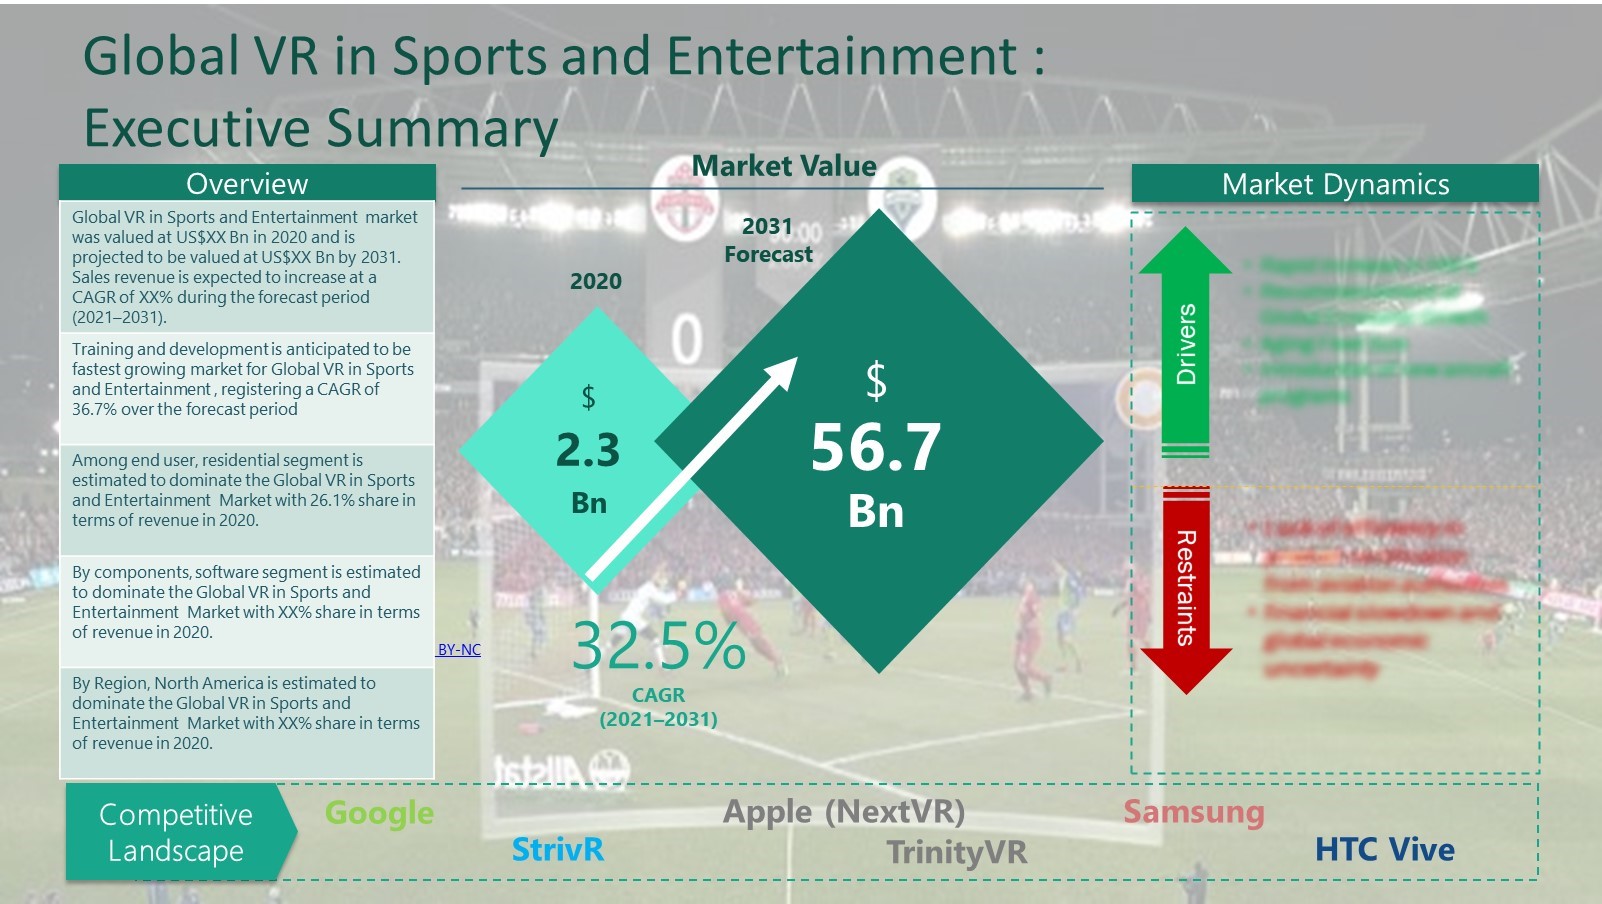 VR in Sports and Entertainment Market